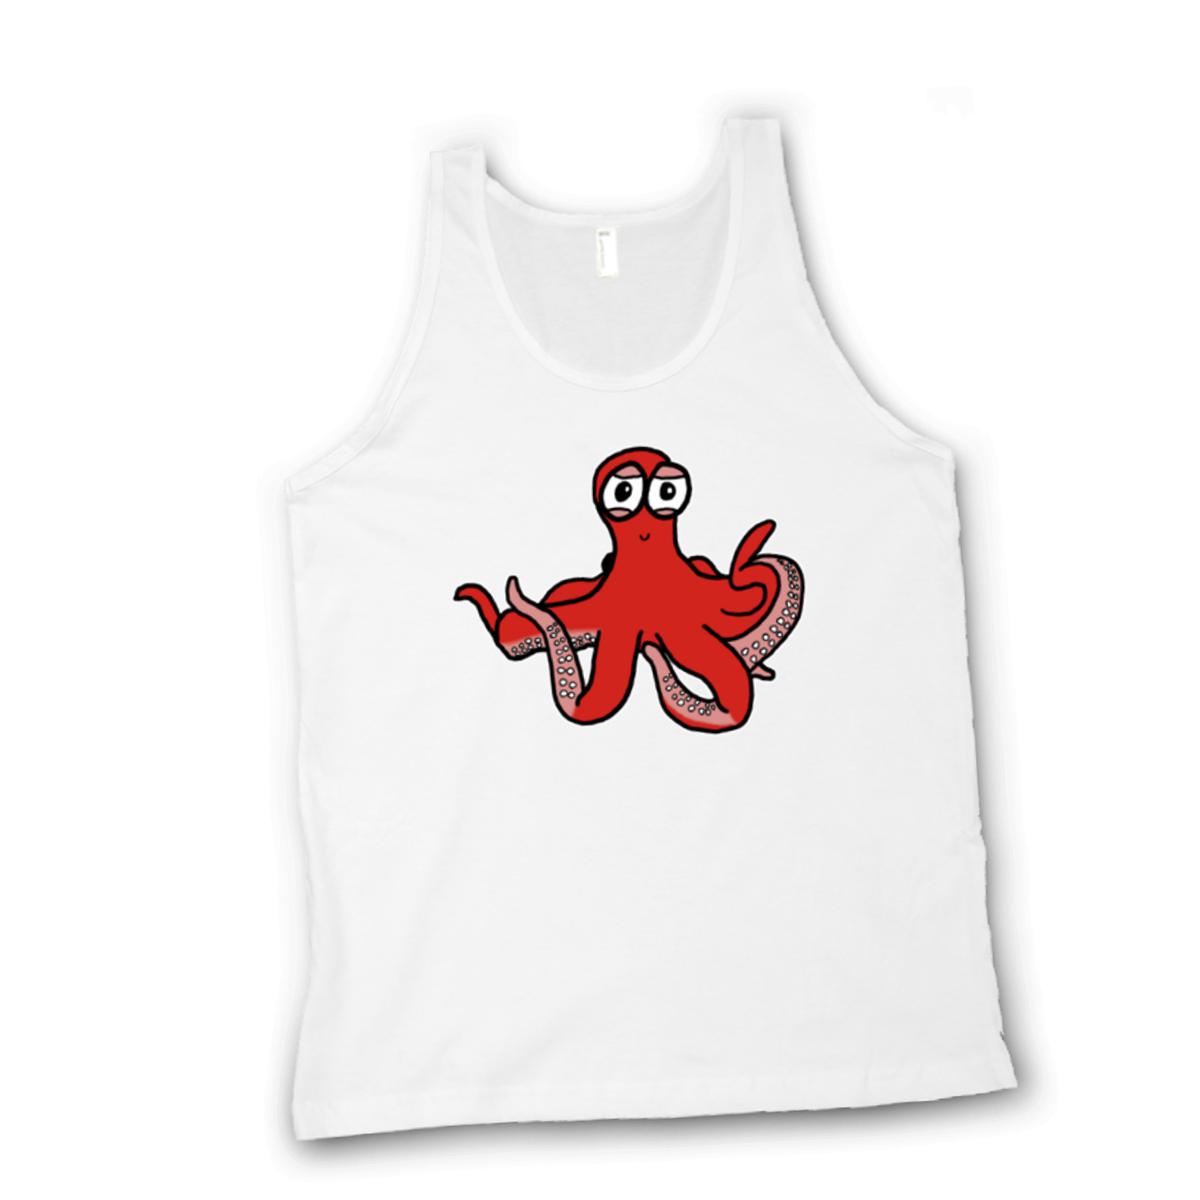 Octopus Unisex Tank Top Extra Small white